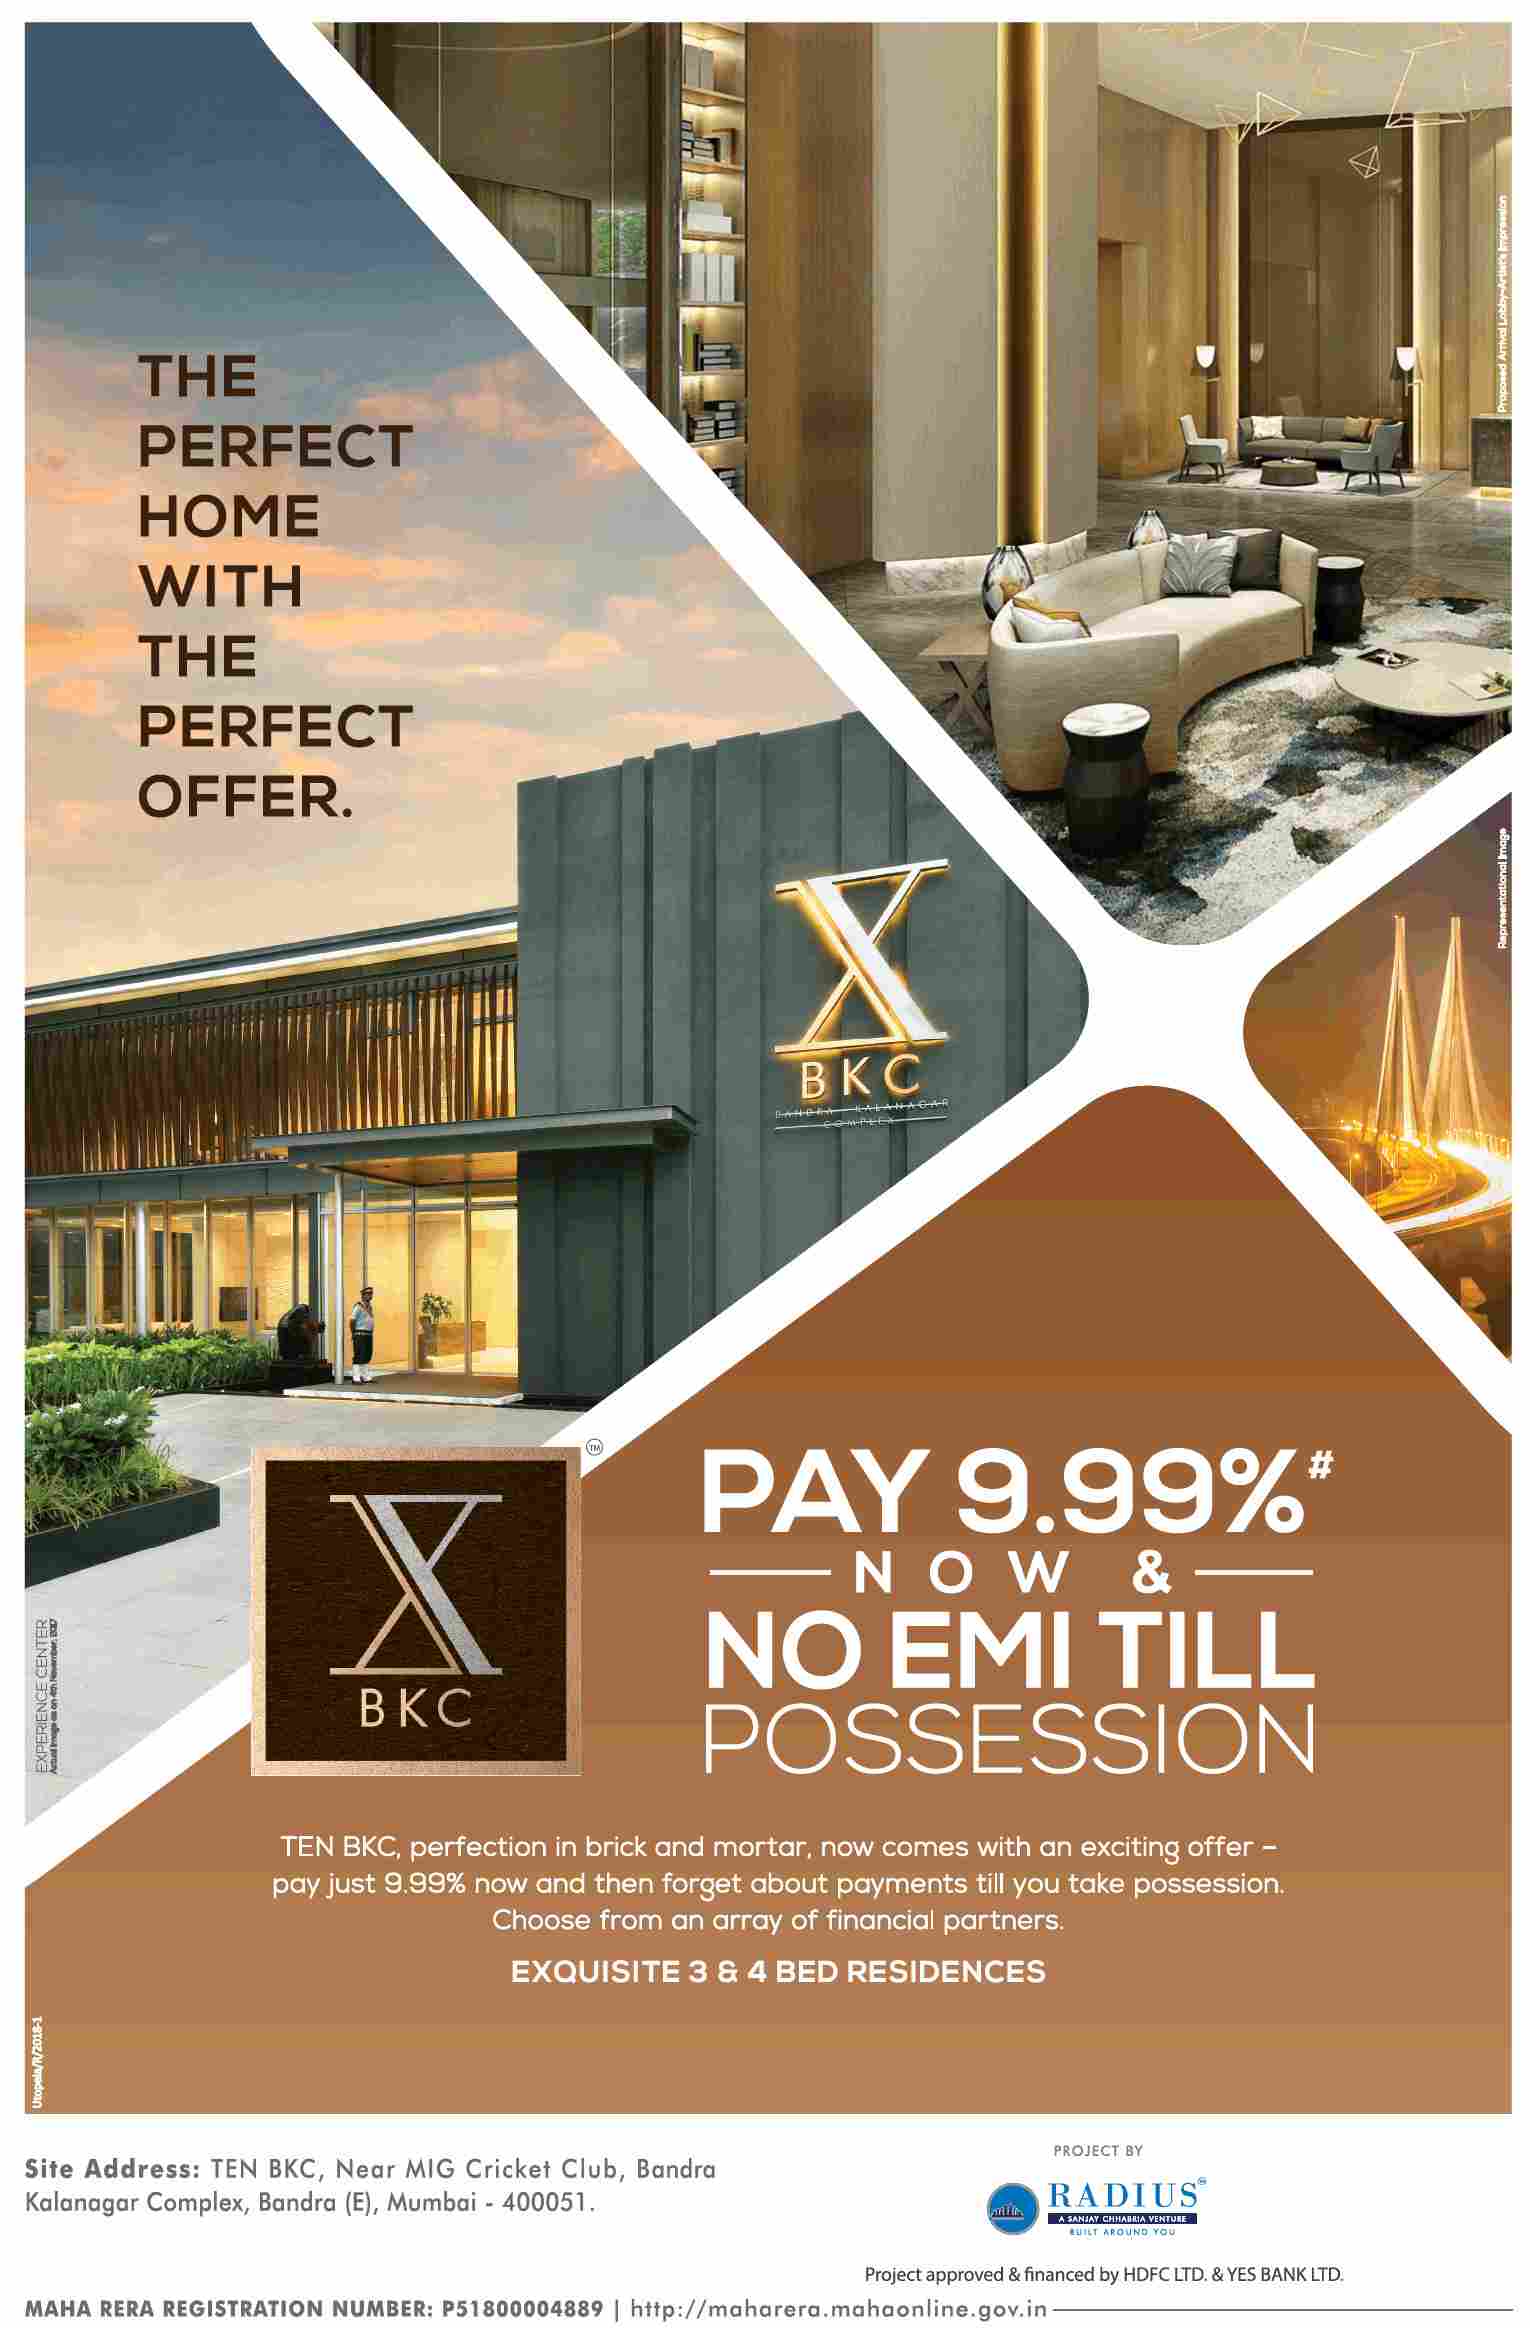 Pay 9.99% now and no EMI till possession at Radius Ten BKC in Mumbai Update